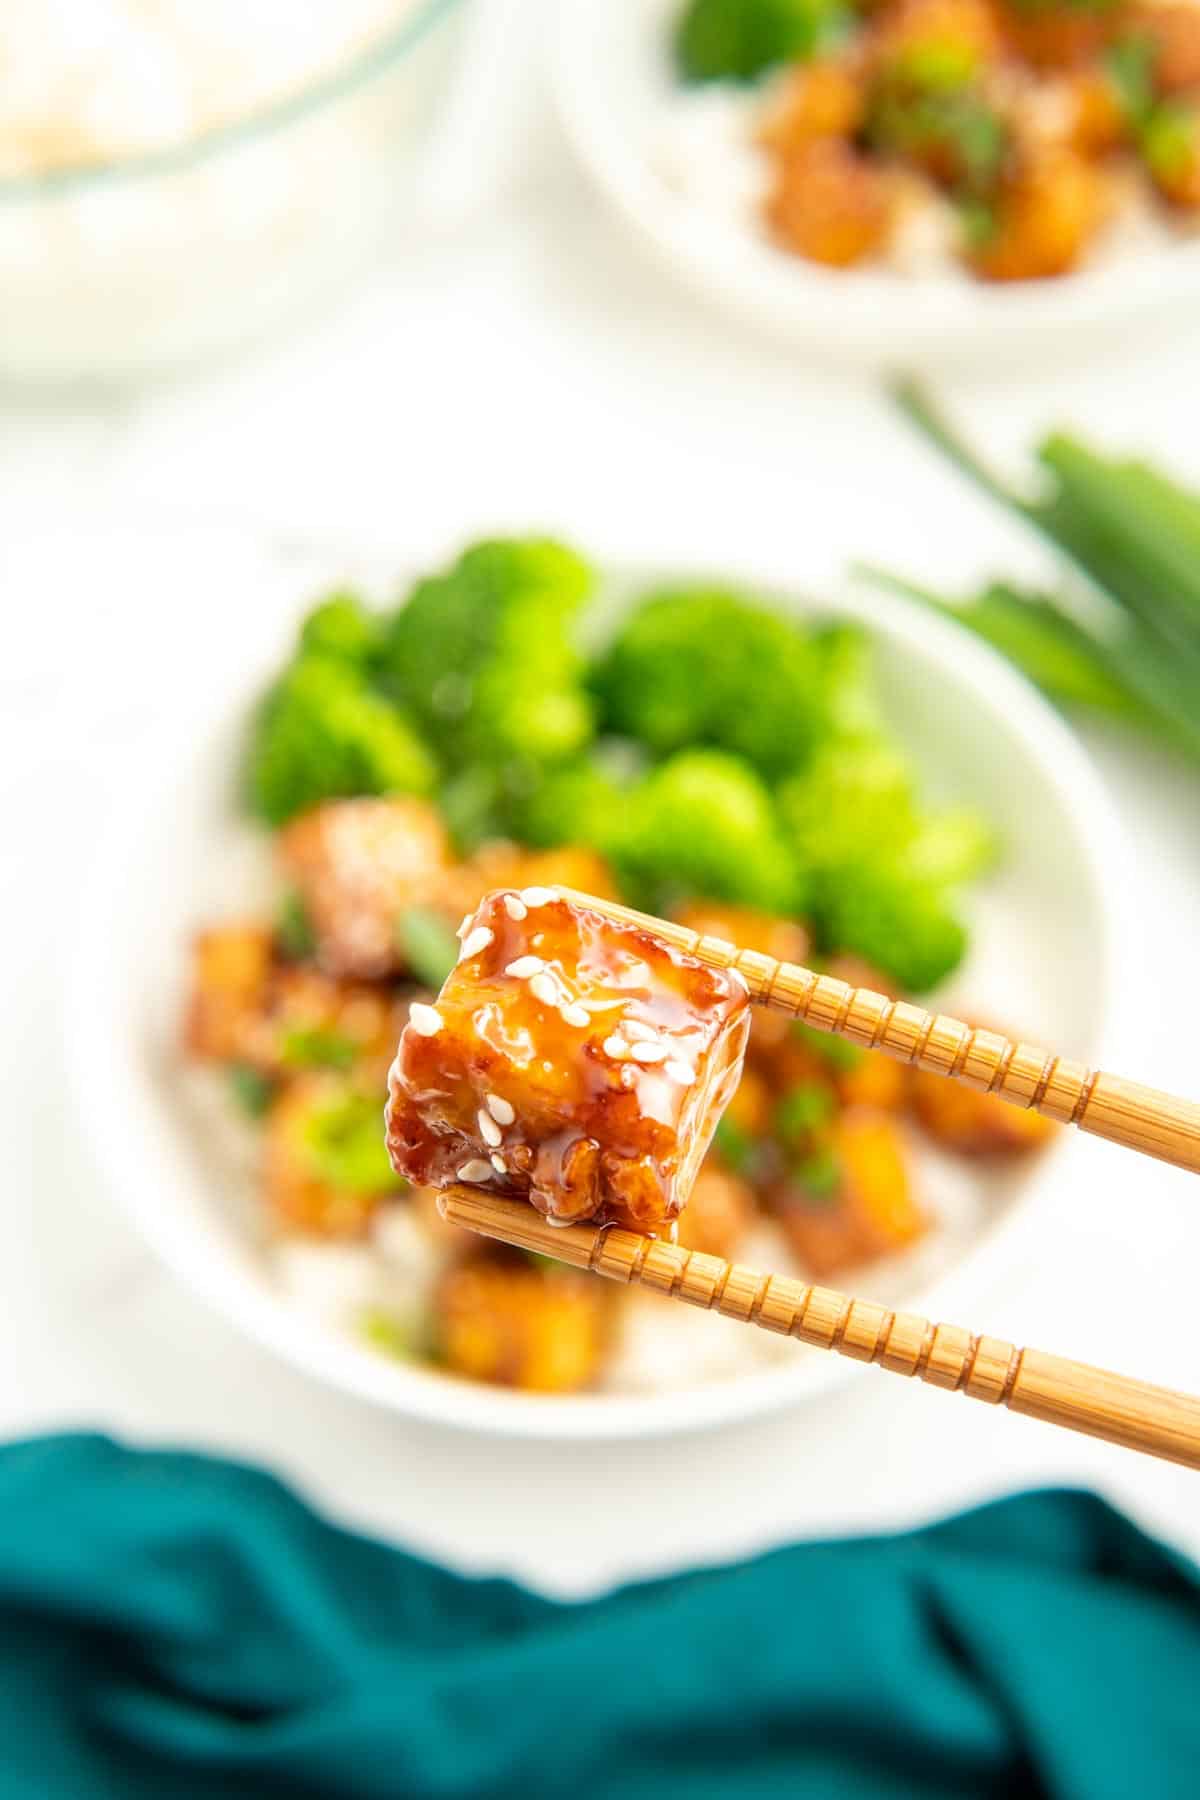 A close-up shots of a piece of sticky tofu being held up by chopsticks.